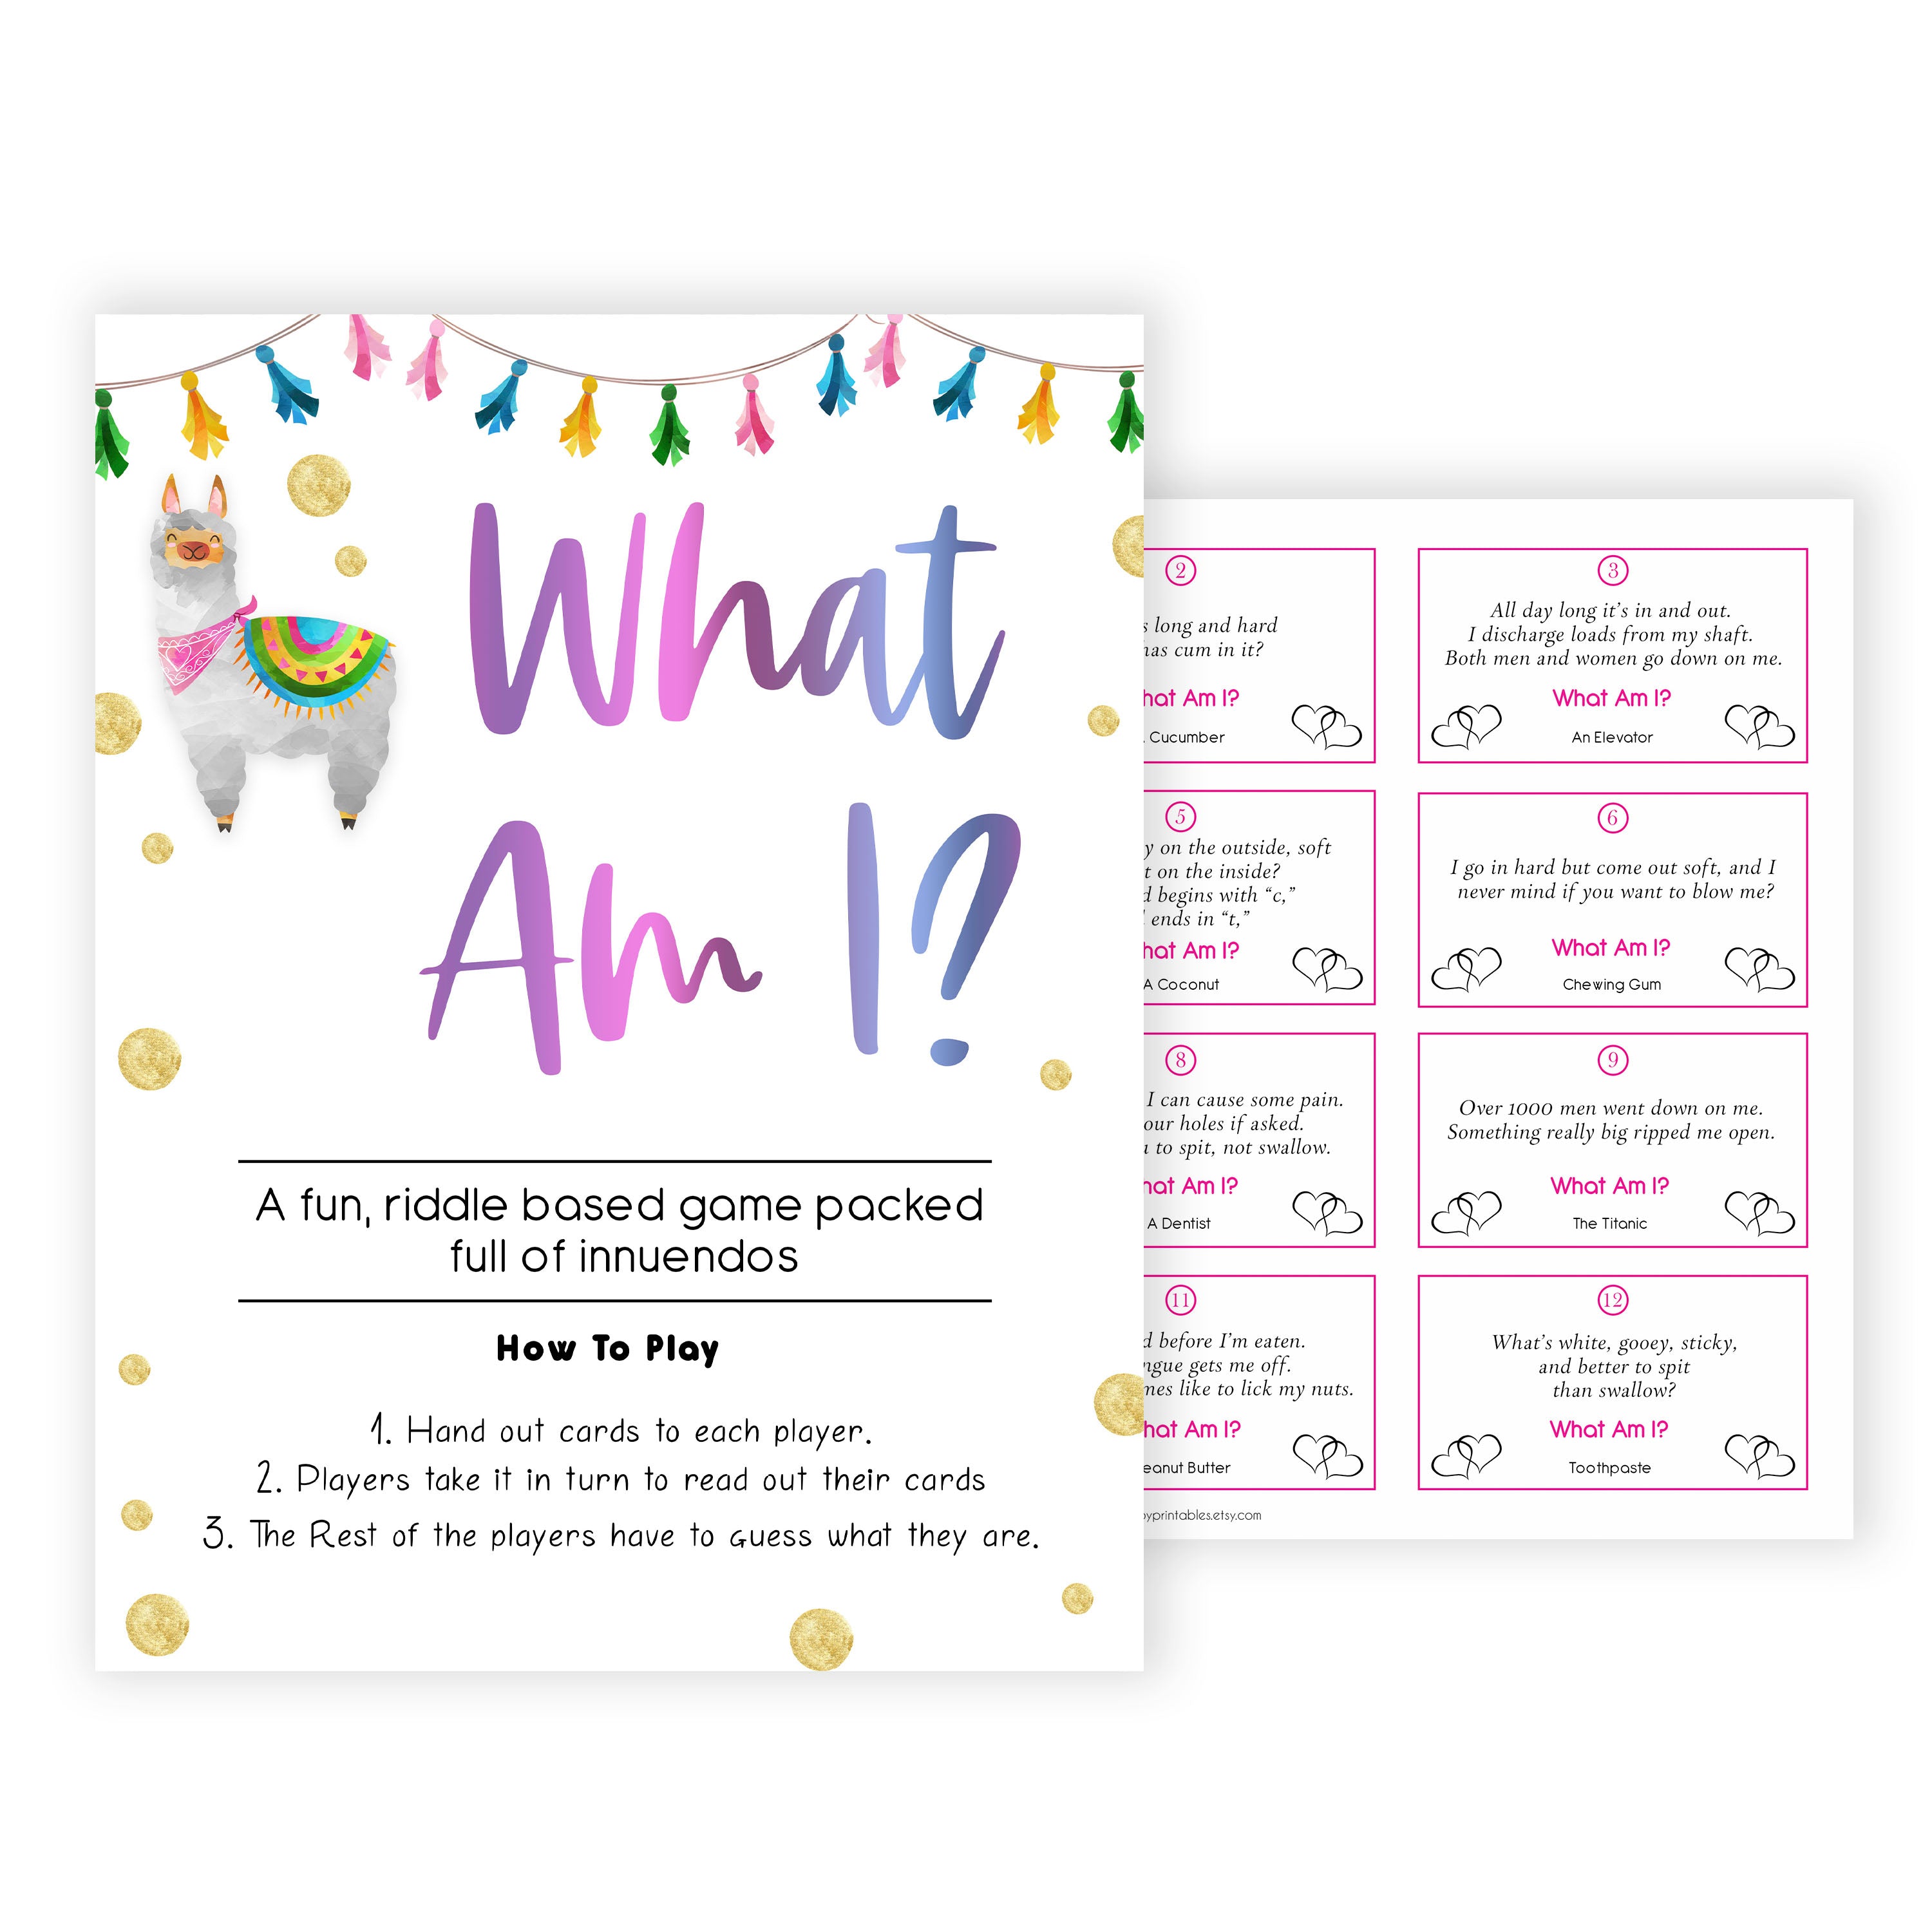 what am I baby game, Printable baby shower games, llama fiesta fun baby games, baby shower games, fun baby shower ideas, top baby shower ideas, Llama fiesta shower baby shower, fiesta baby shower ideas